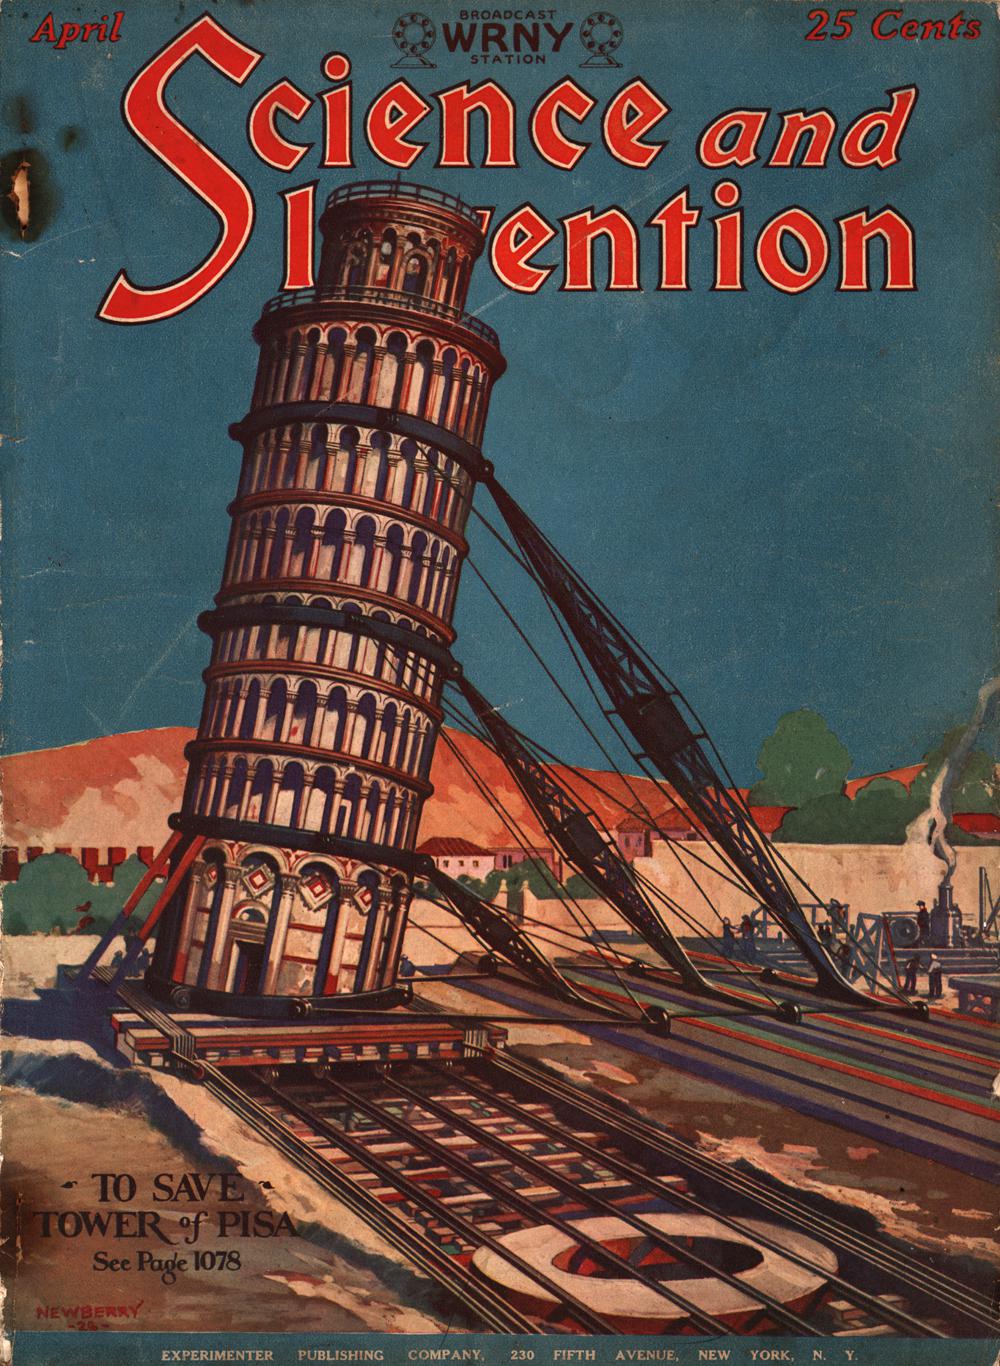 1928 - Science and invention - Vol. 15, No. 12